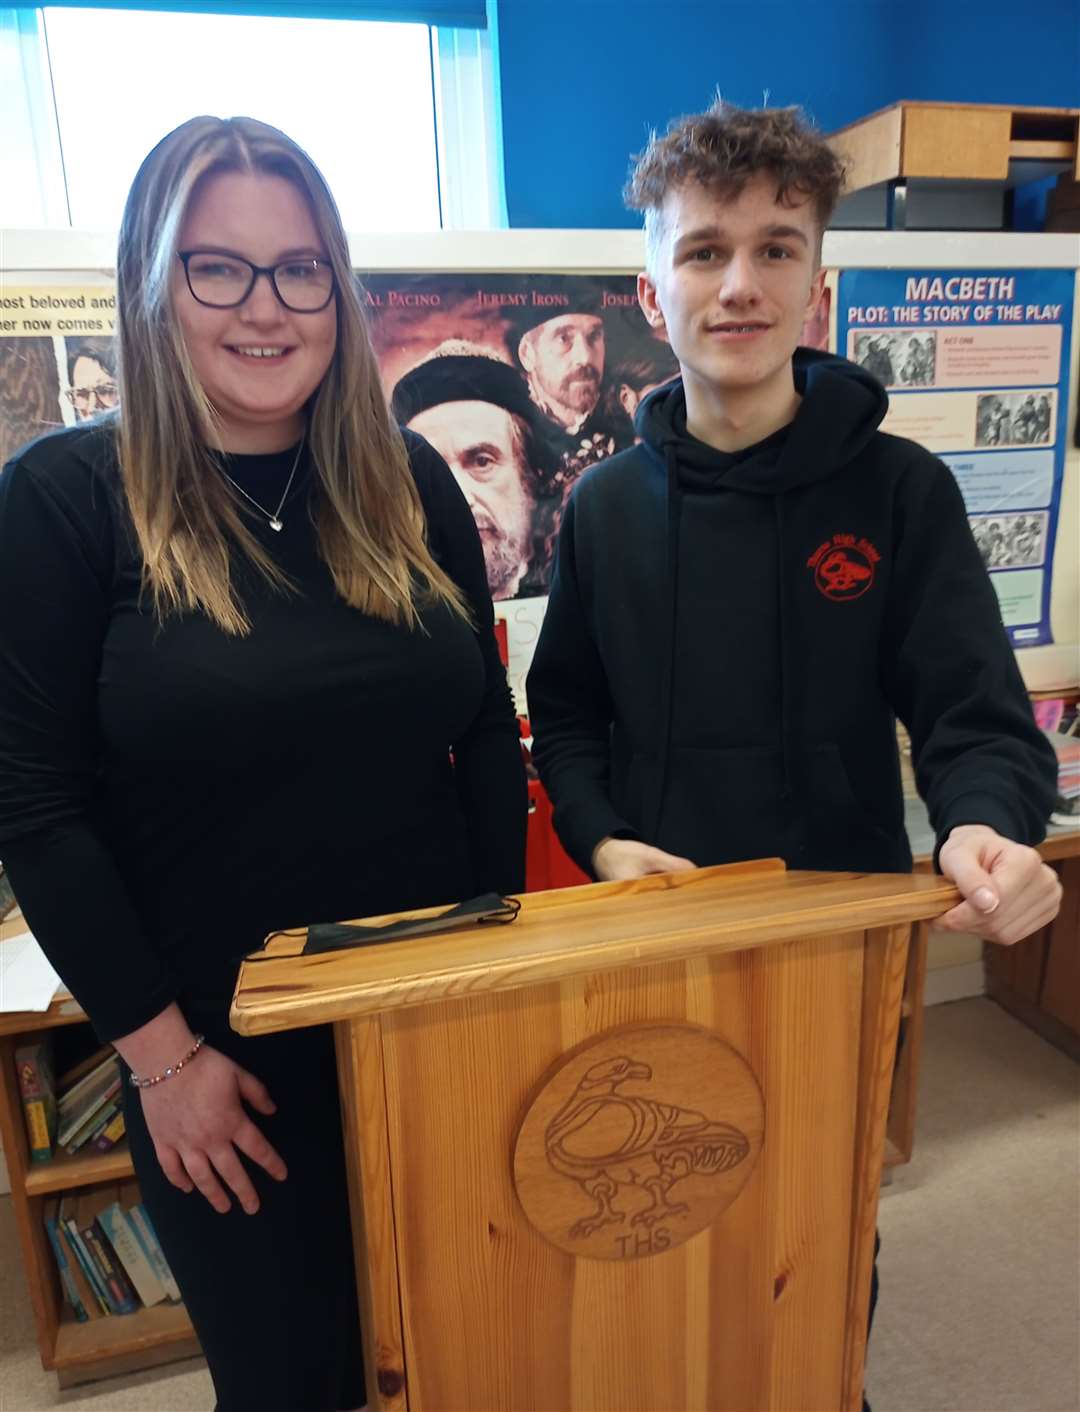 Fifth-year pupils Ashleigh Coghill and Innes Morgan, both from Dunnet, are among 16 teams to have reached the semi-finals of the Donald Dewar Memorial Debating Tournament, organised by the Law Society of Scotland.